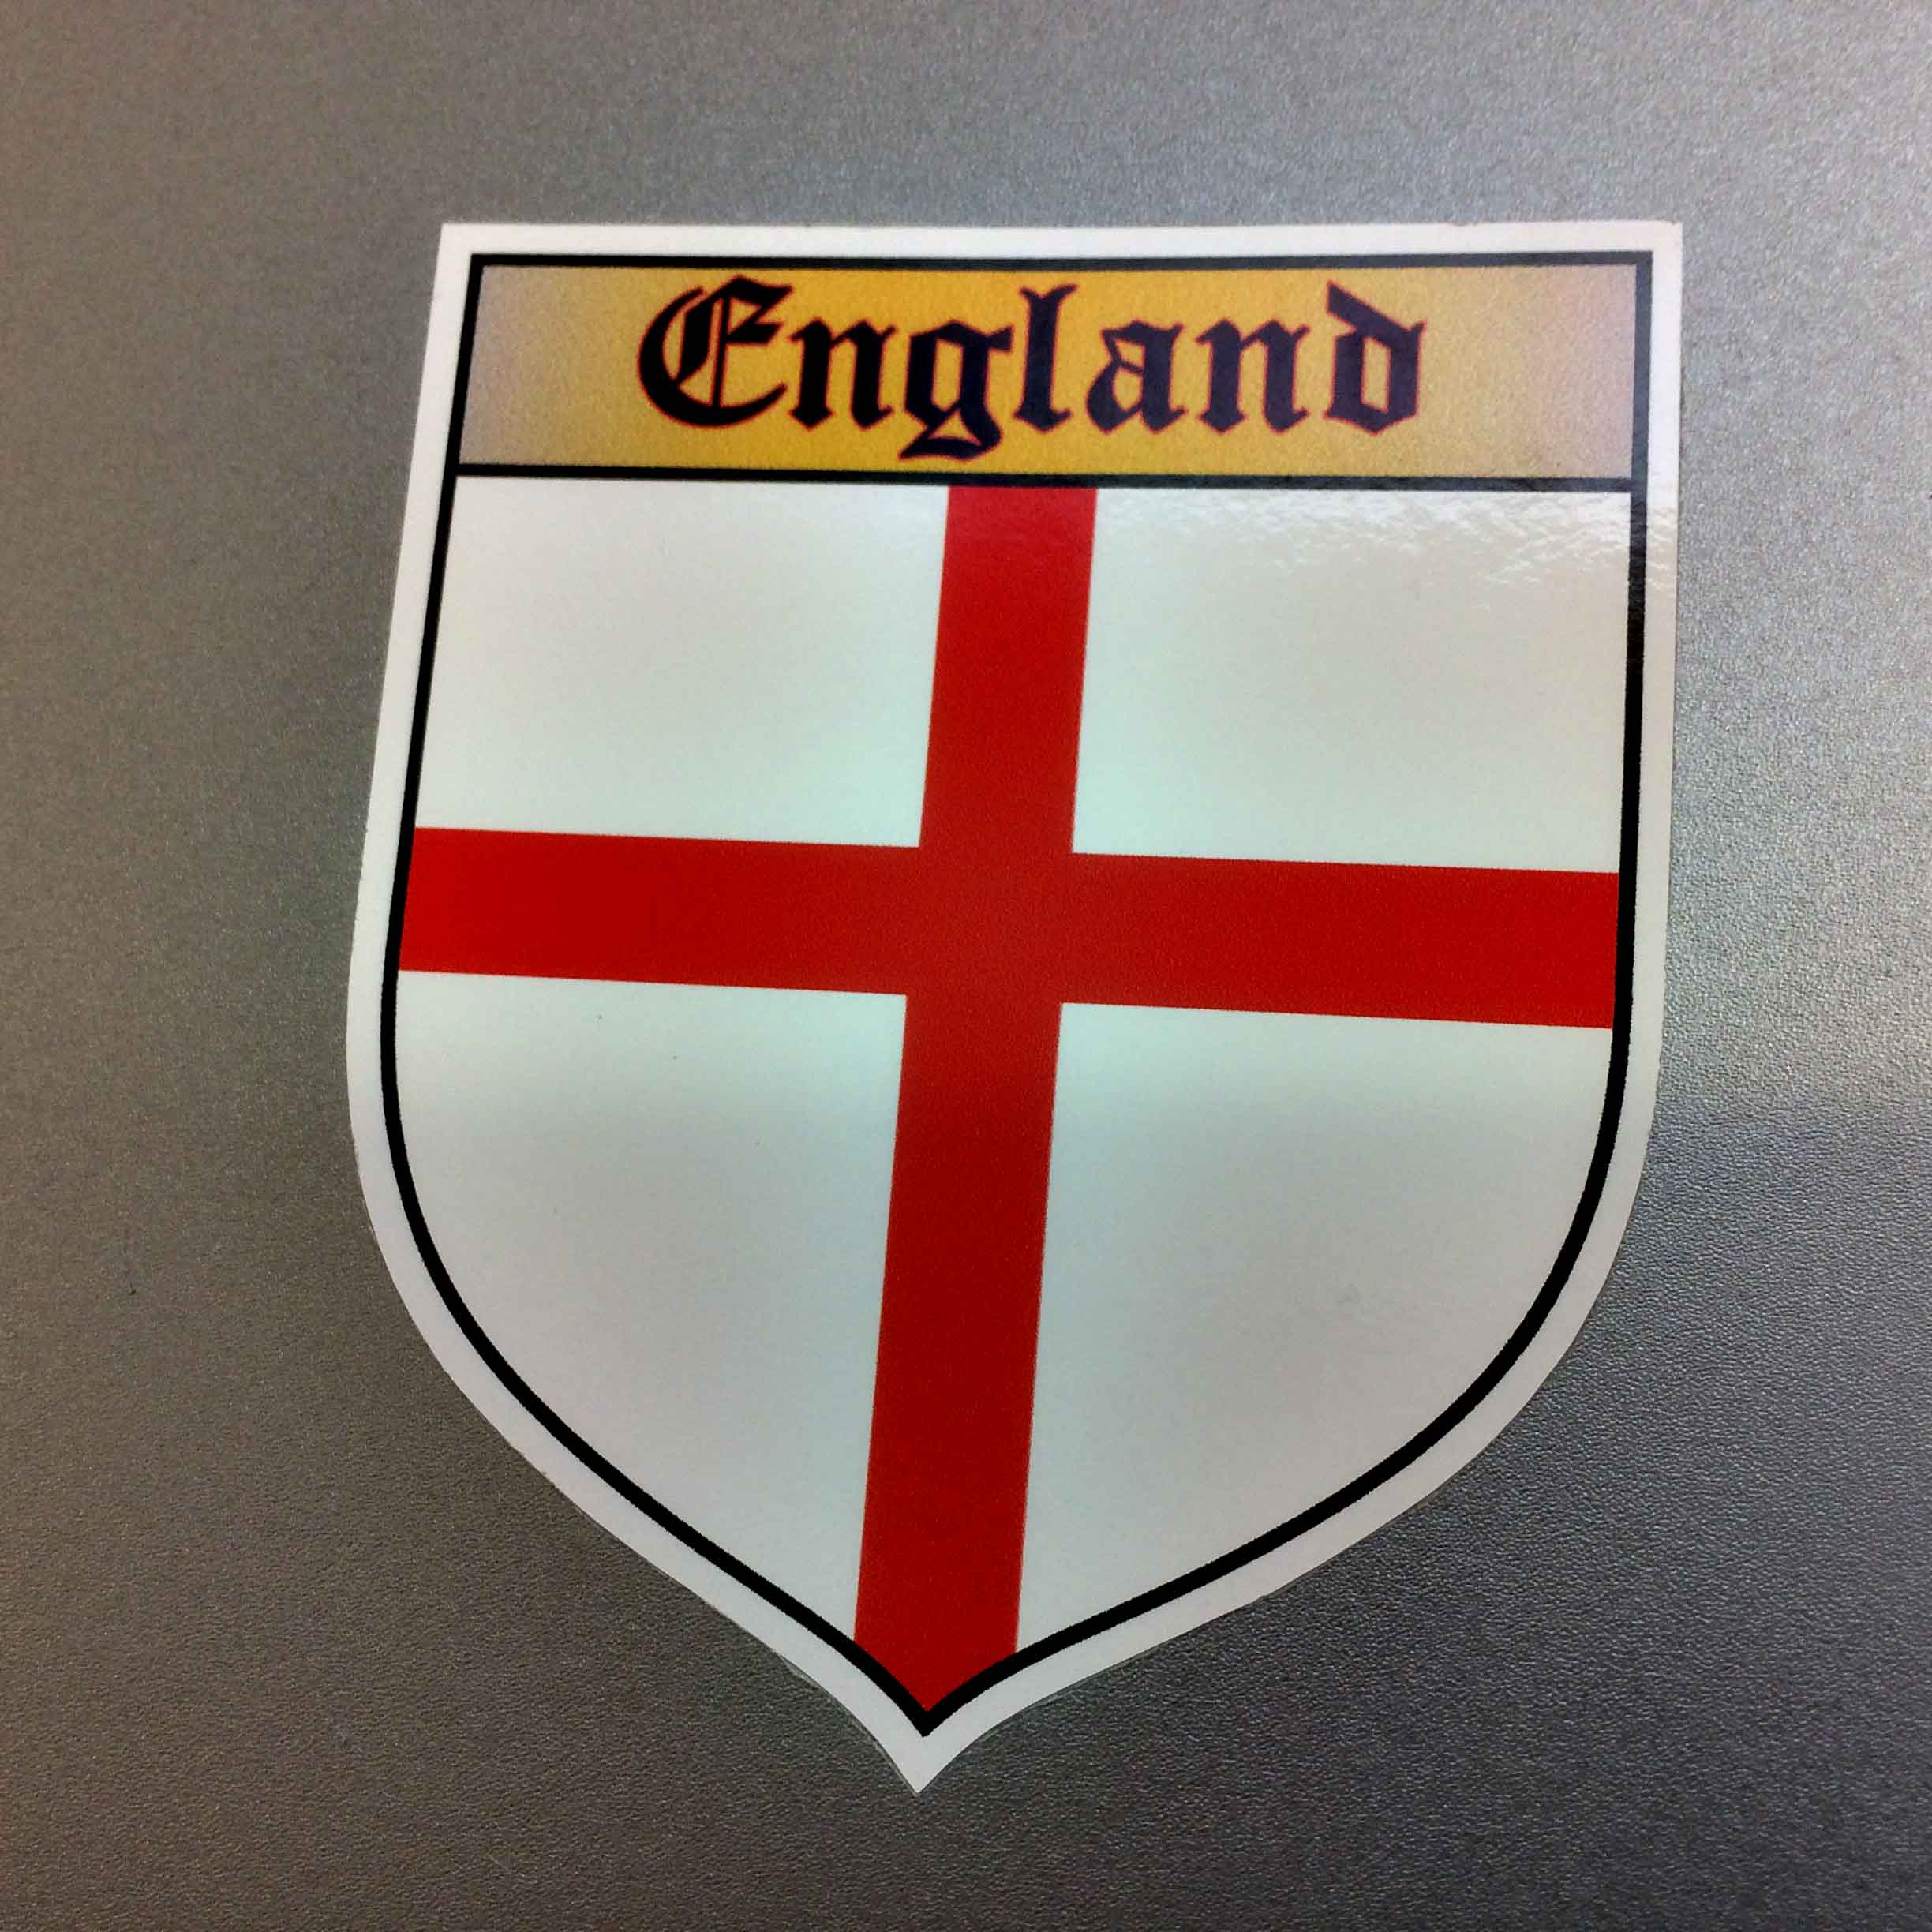 An England shield. A red cross on a white field. Across the top on a gold banner is England in black Gothic font.